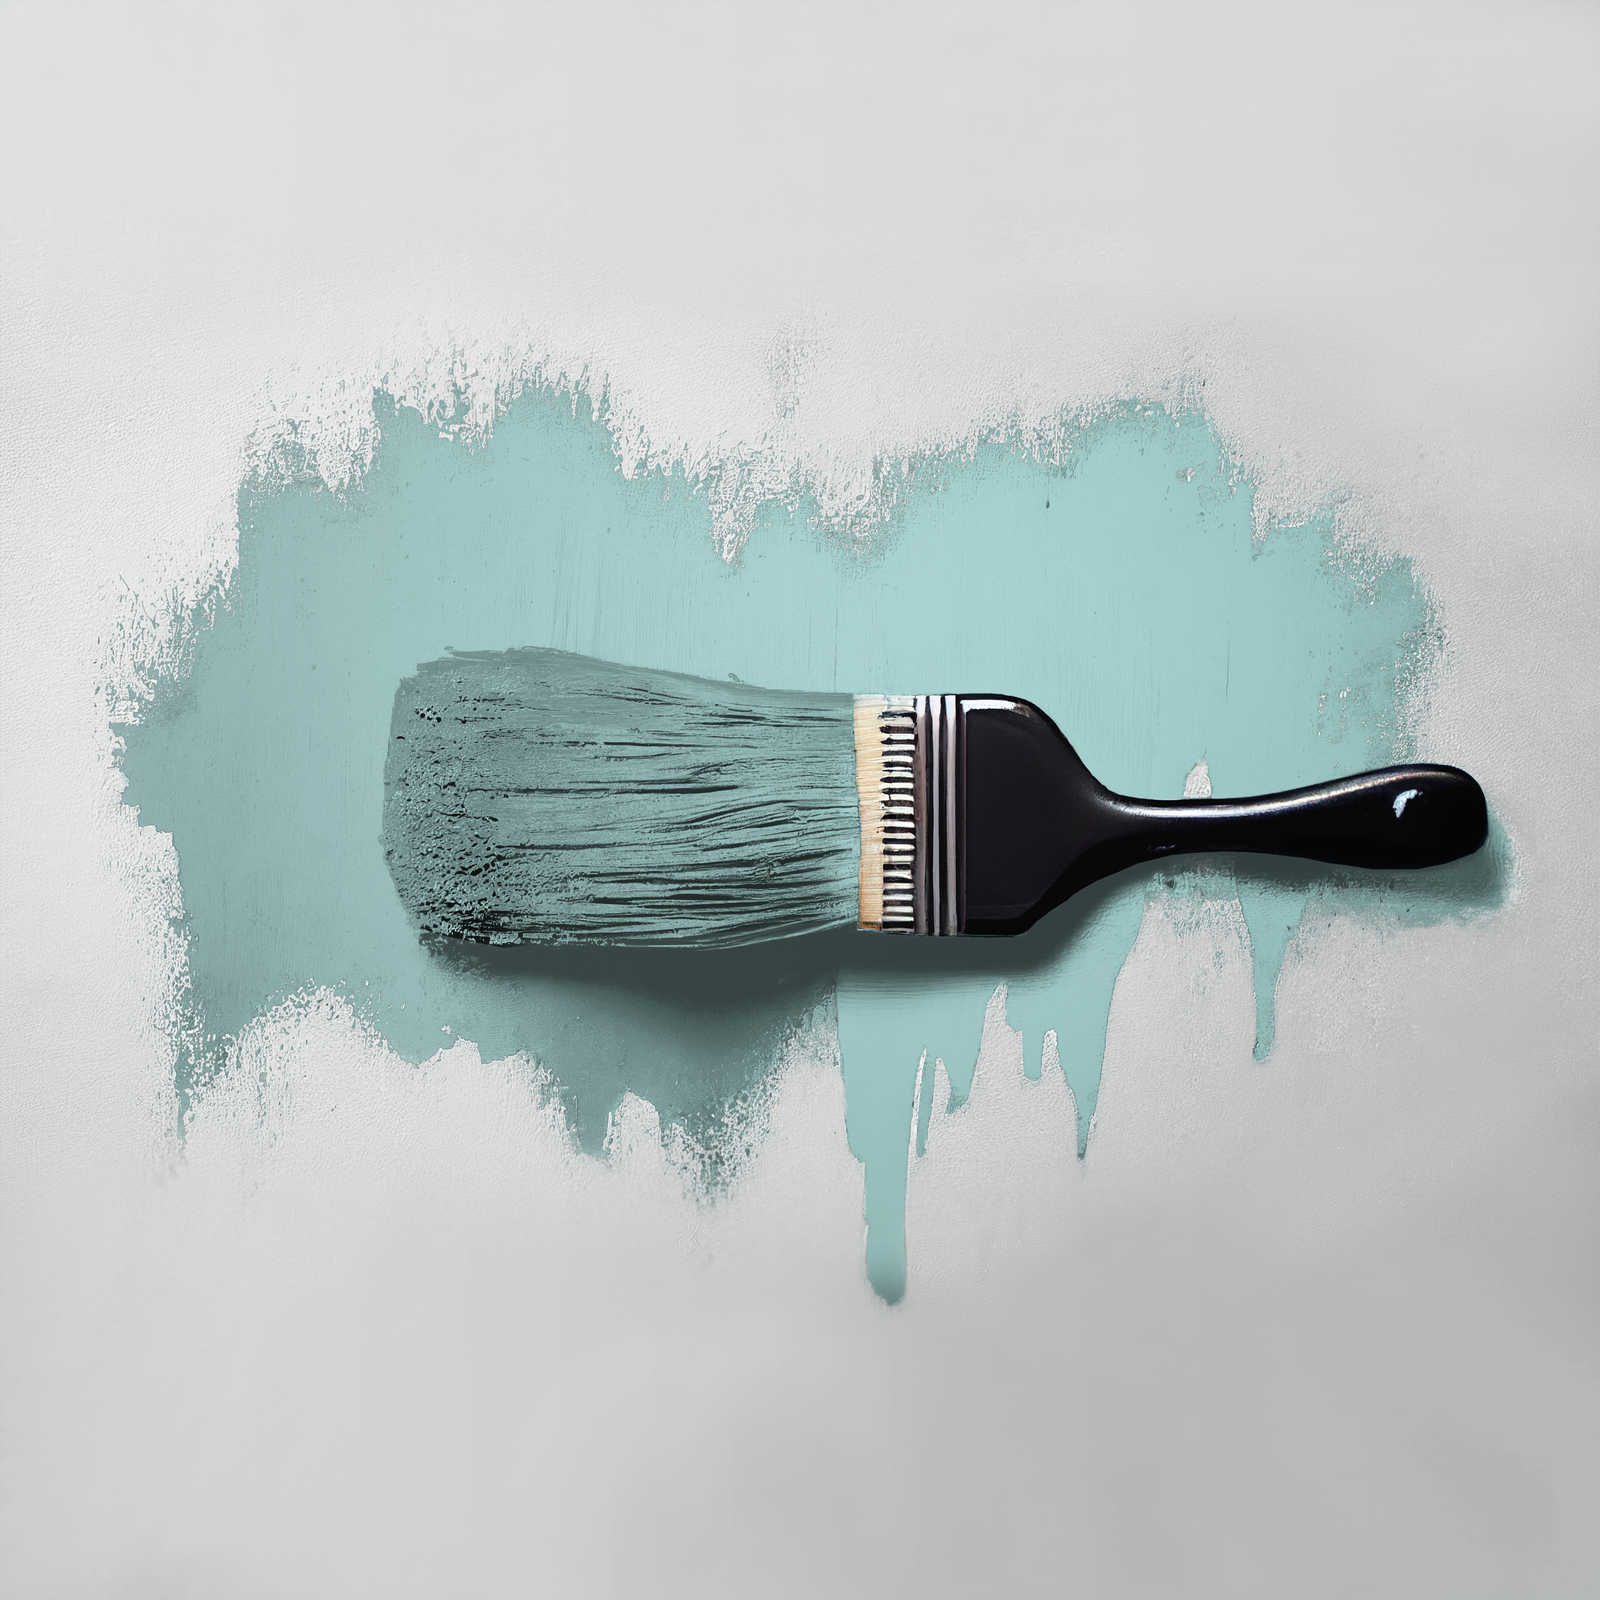             Wall Paint TCK3007 »Swimming Pool« in serene turquoise – 2.5 litre
        